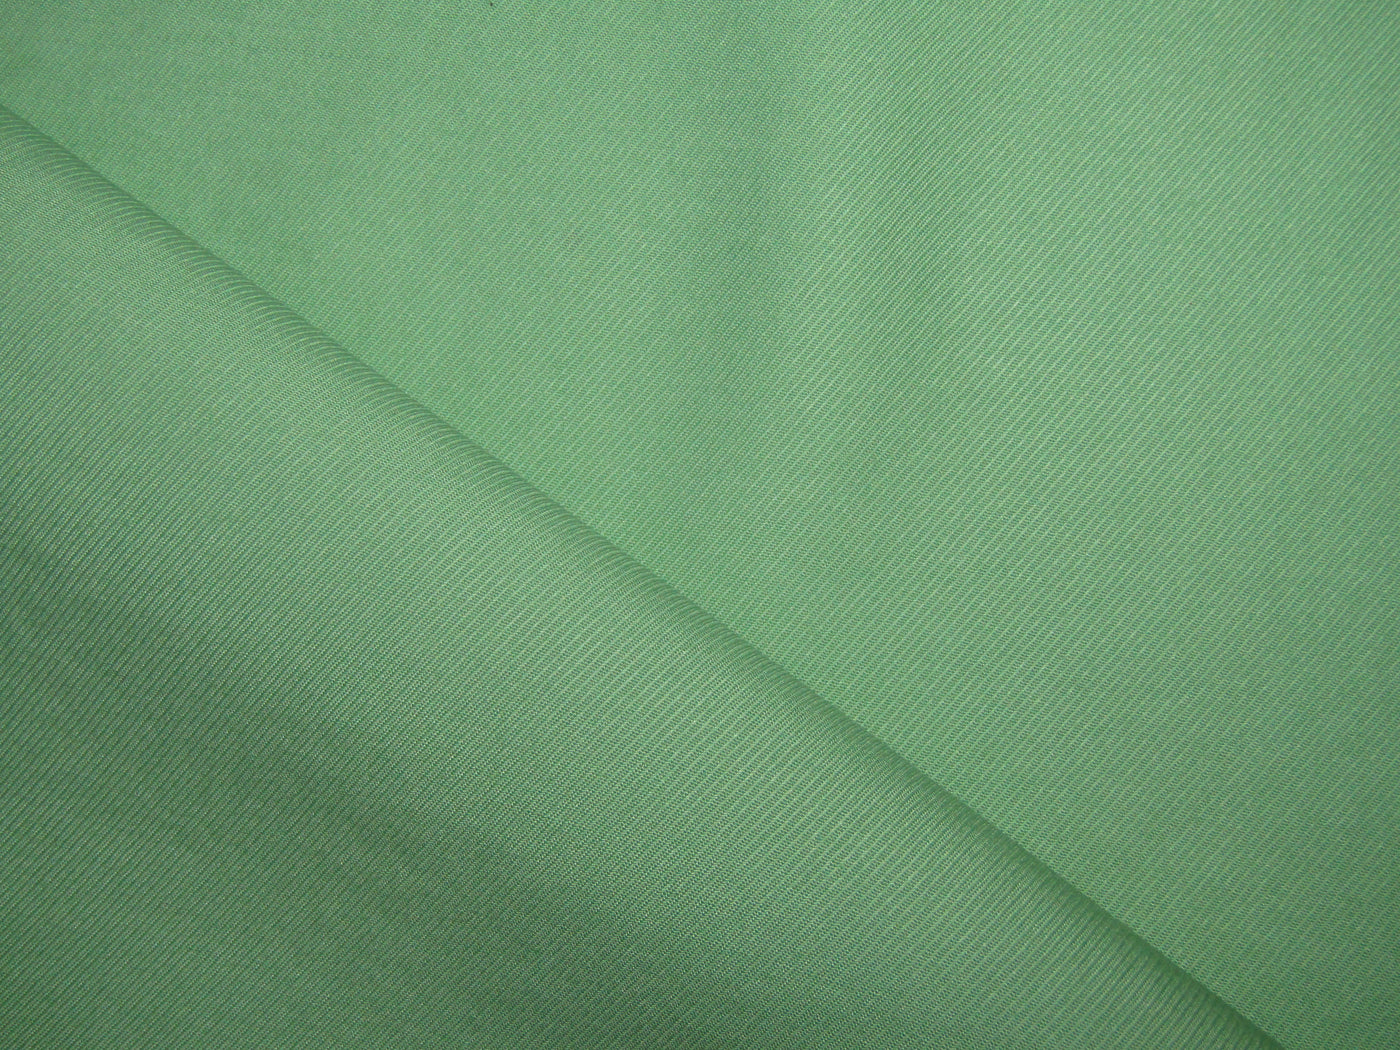 SUITING 100% TENCEL 350GRAMS/ 280GSM MADE IN INDIA 58" available in green/lilac/teal/rose pink and white ivory